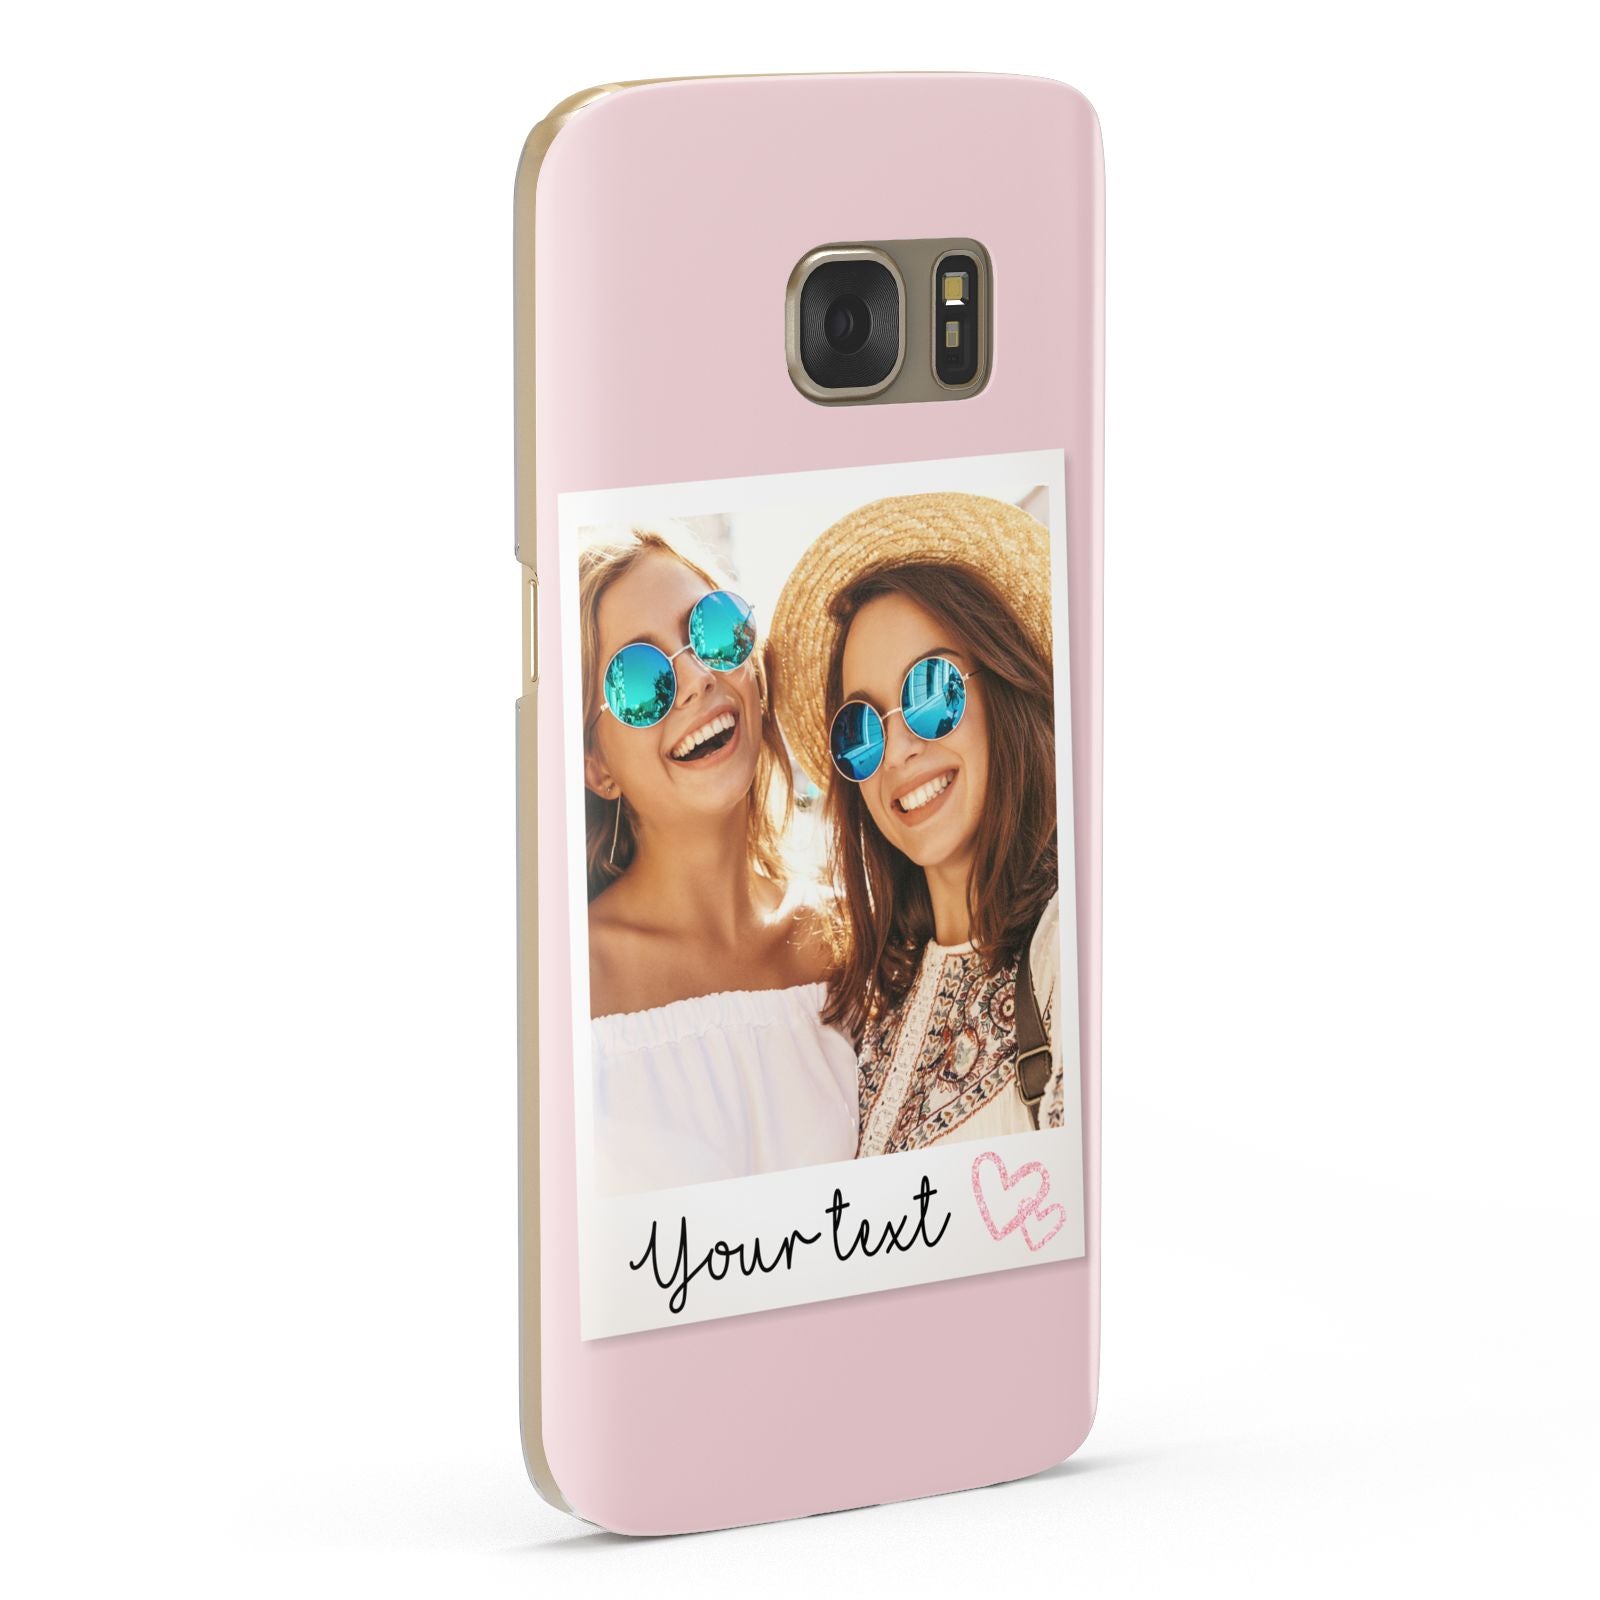 Personalised Best Friend Photo Samsung Galaxy Case Fourty Five Degrees